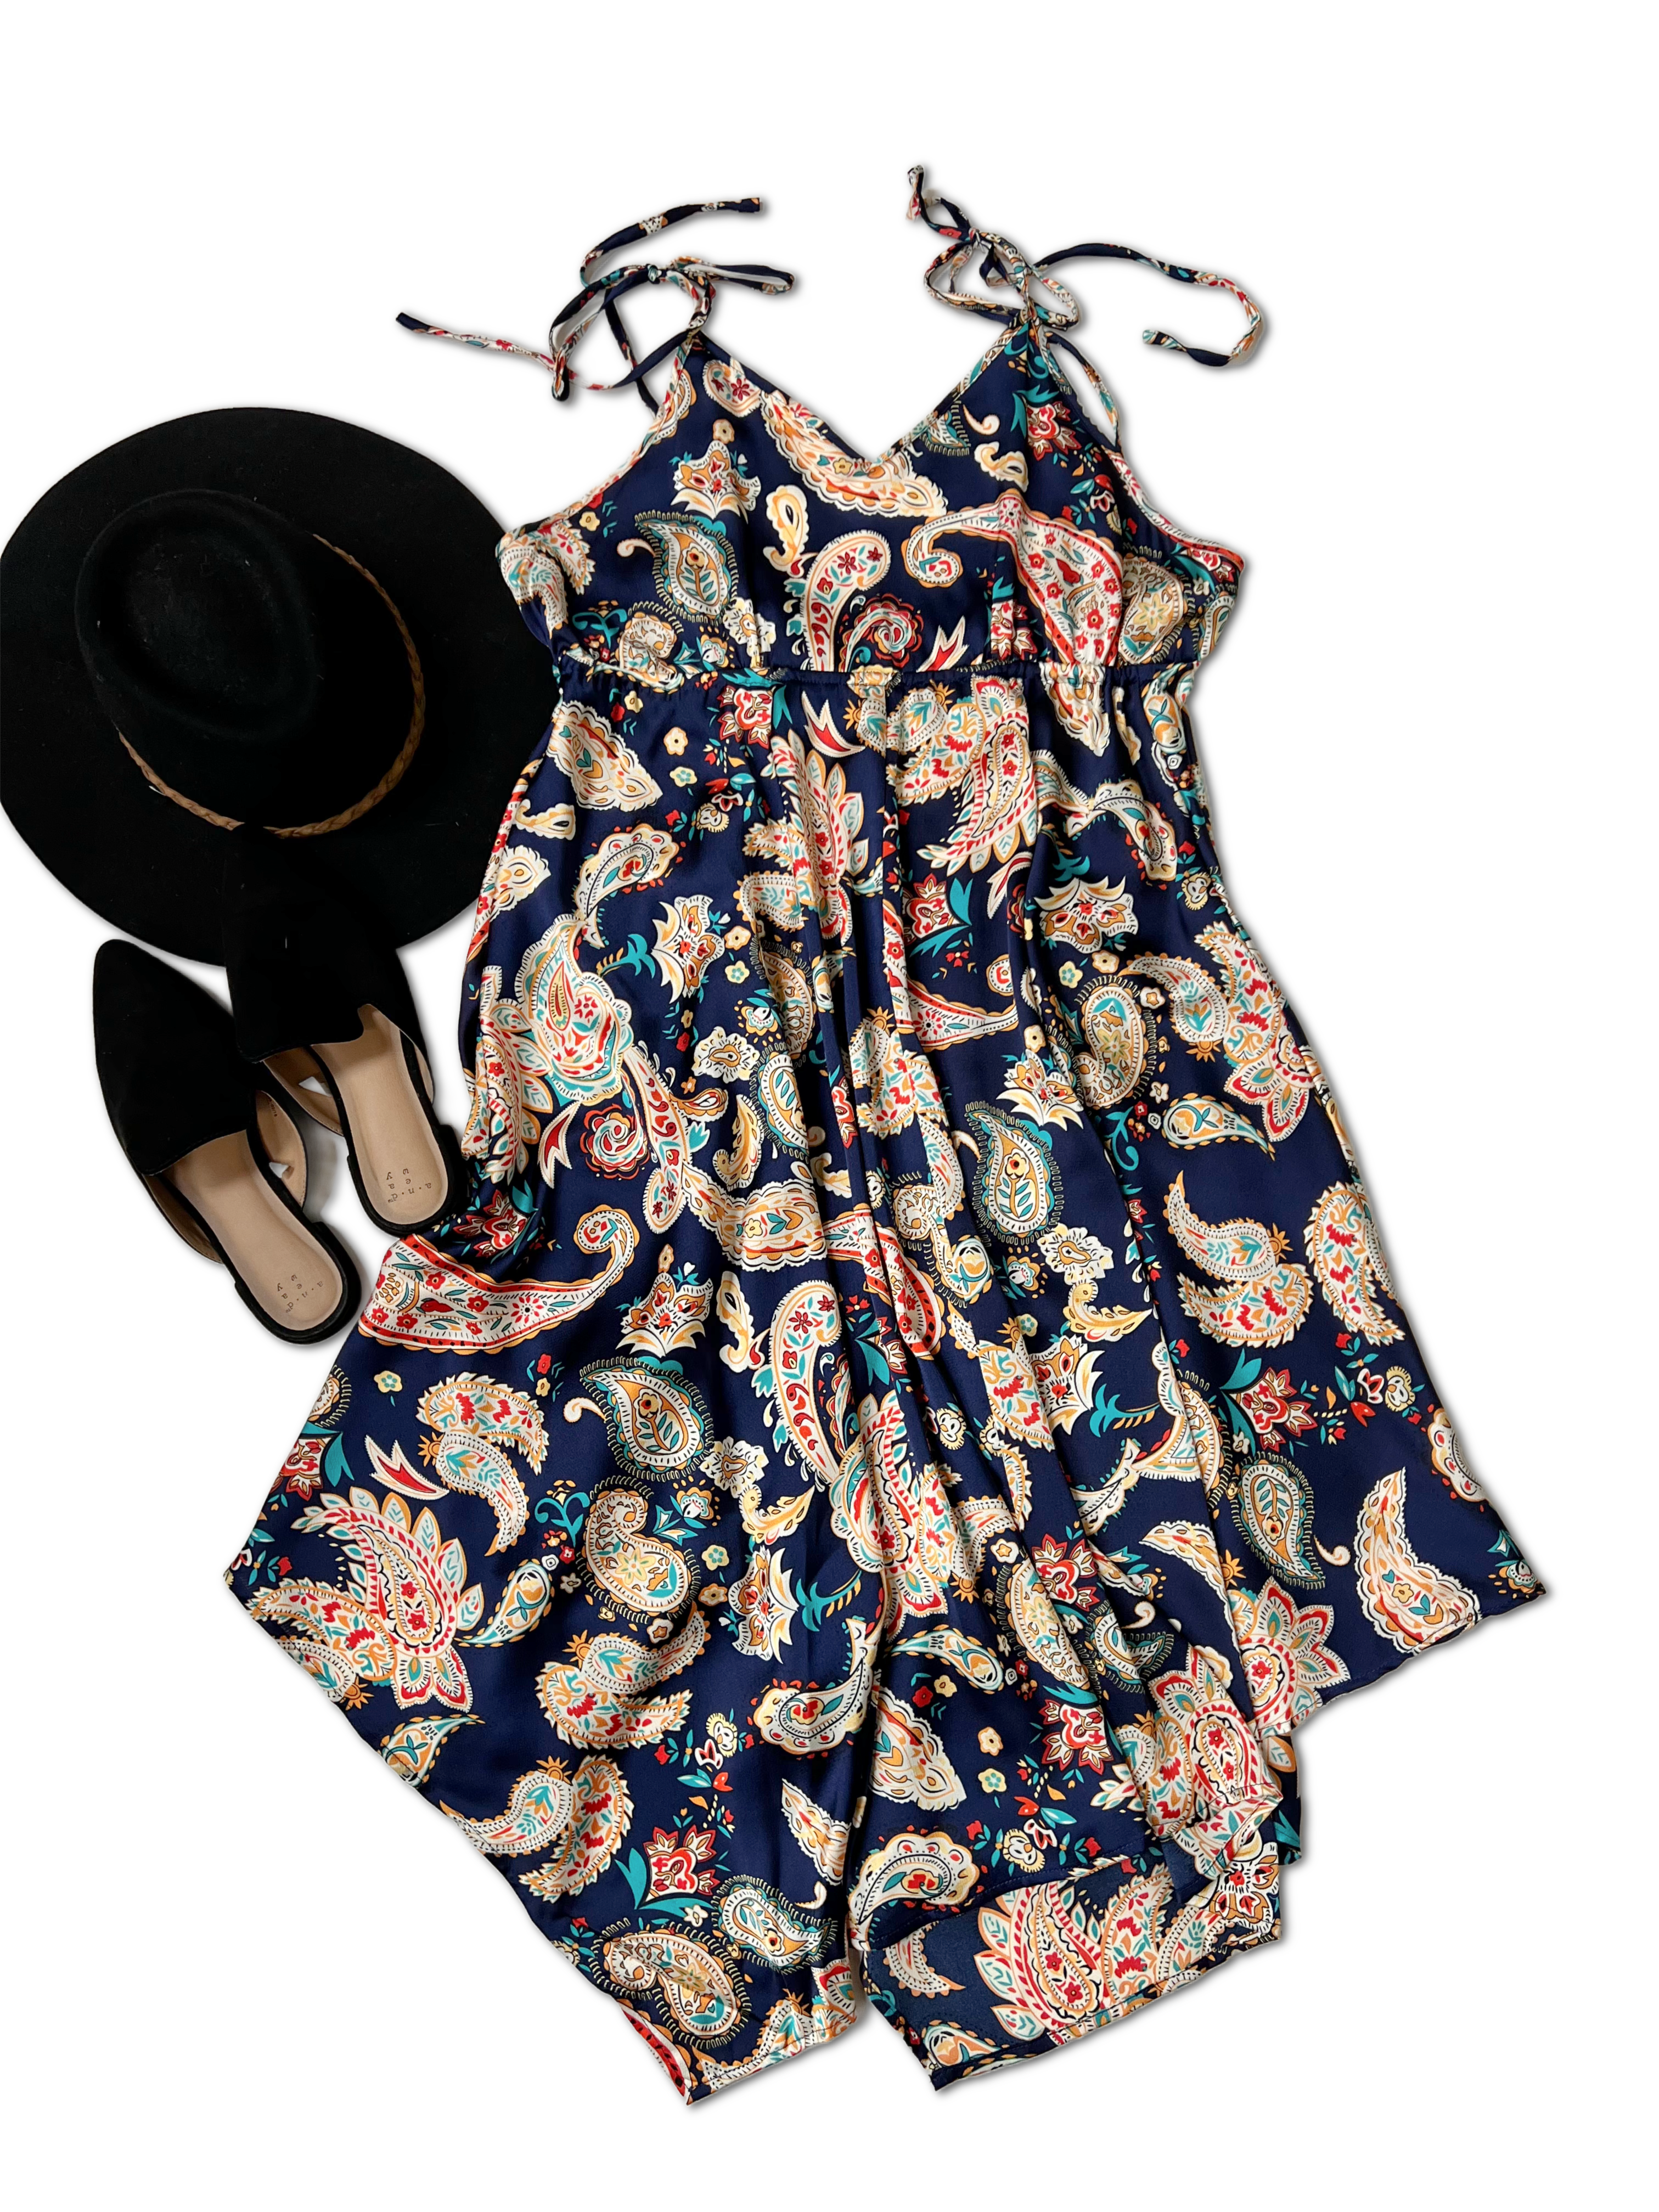 LLOVE Tallulah Paisley Dress in Navy OOTD Boutique Simplified